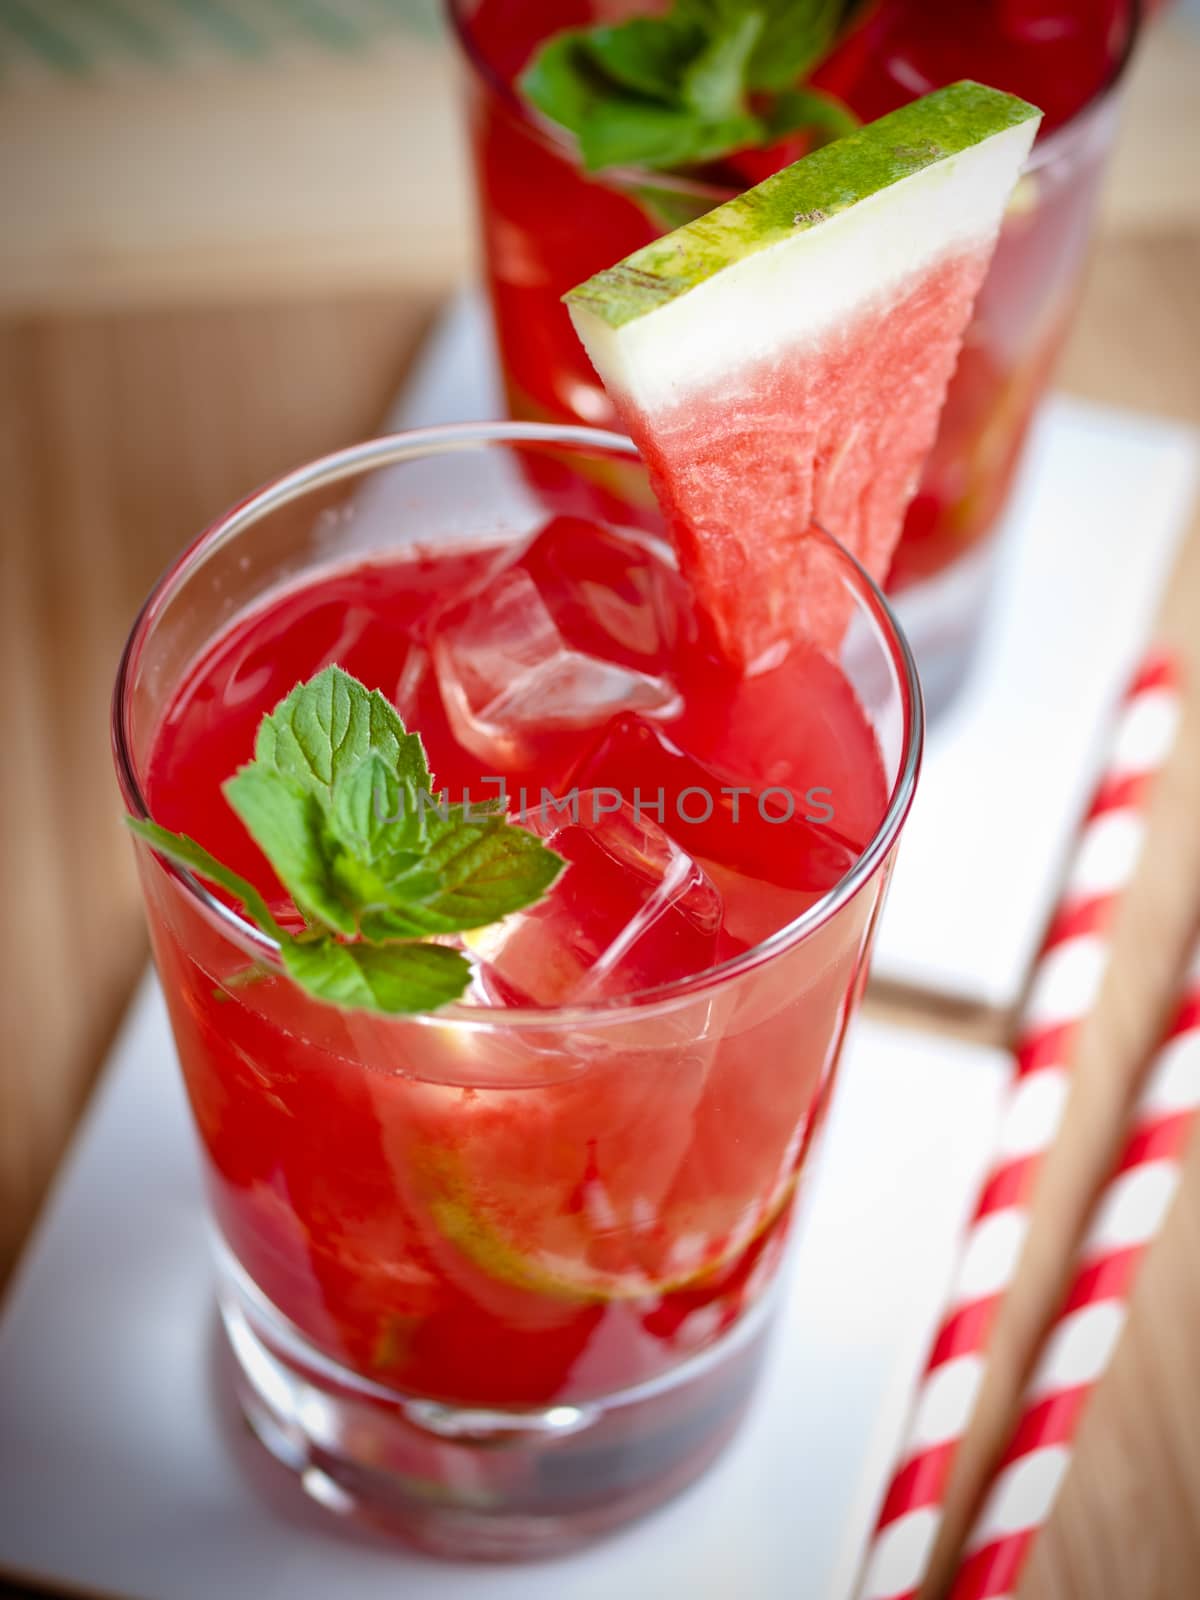 Freshly served watermelon mojito cocktails